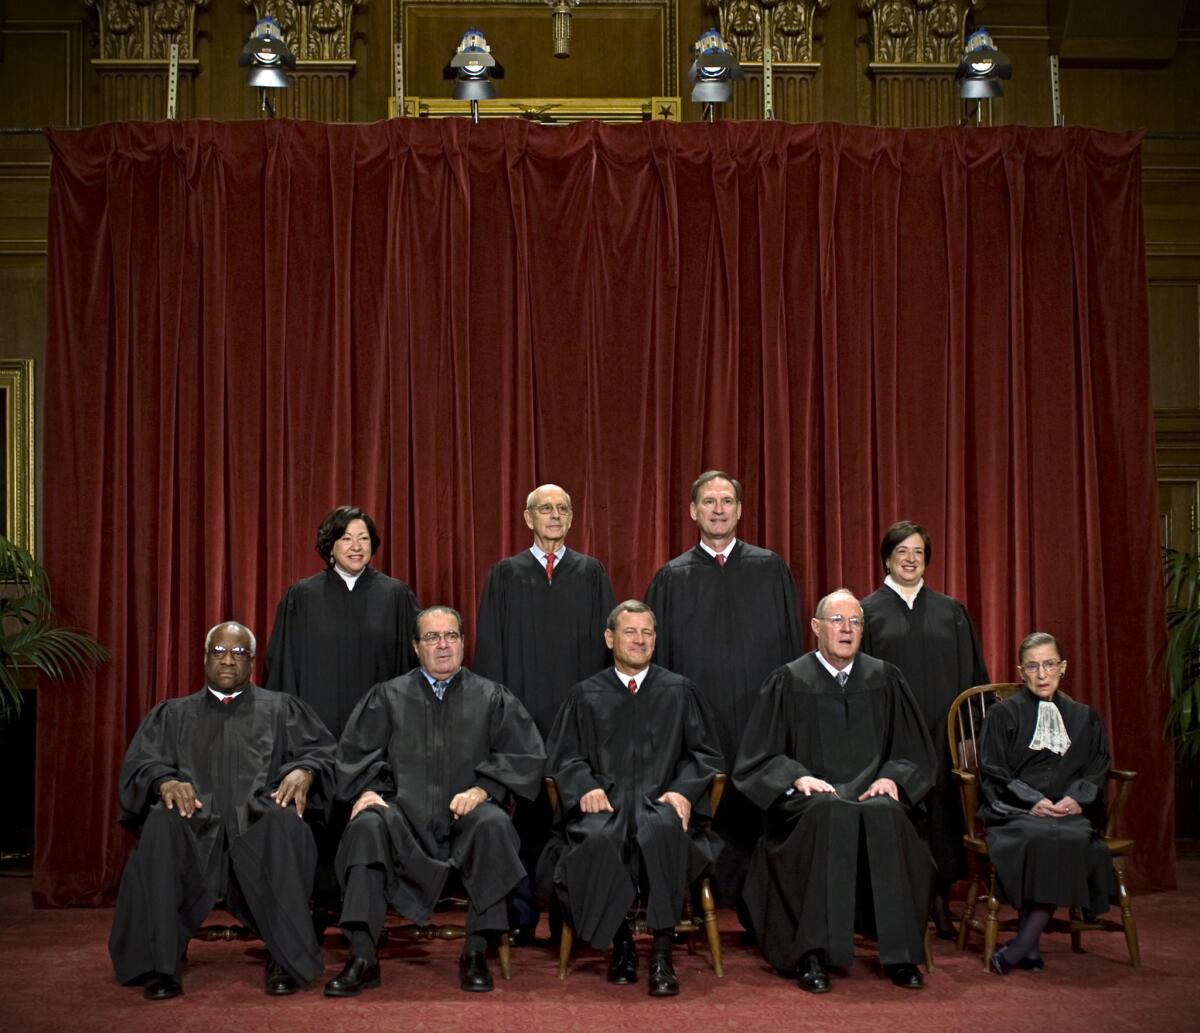 The nine members of the Supreme Court pose for a group photograph in 2010.